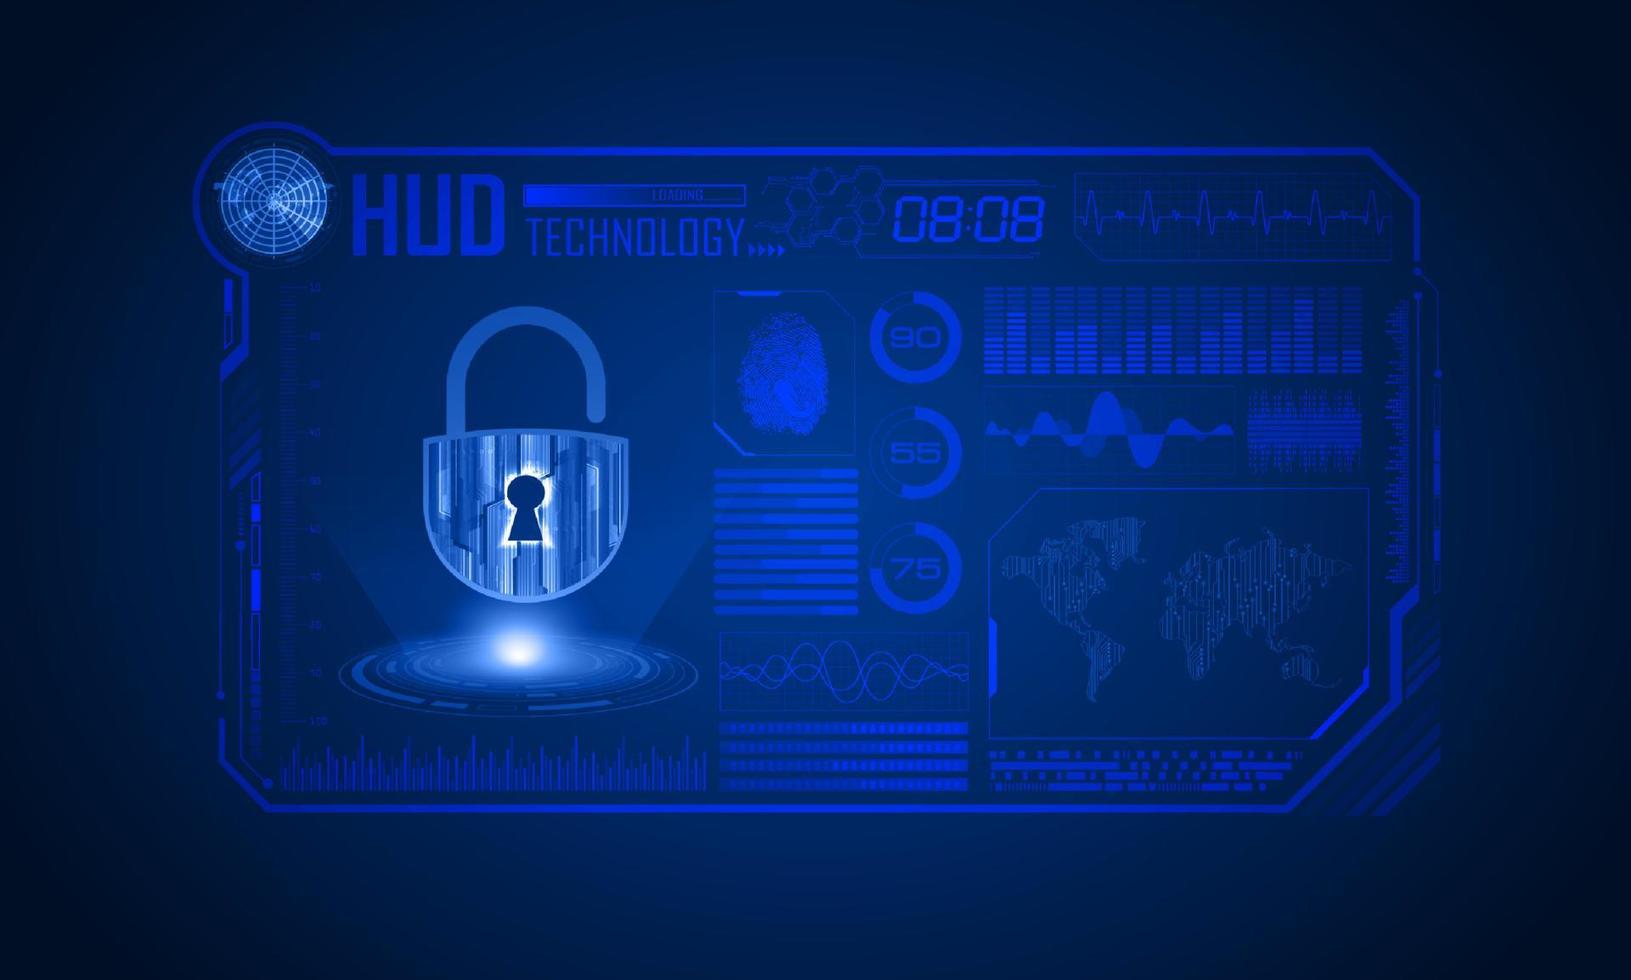 Modern HUD Technology Screen Background with padlock vector